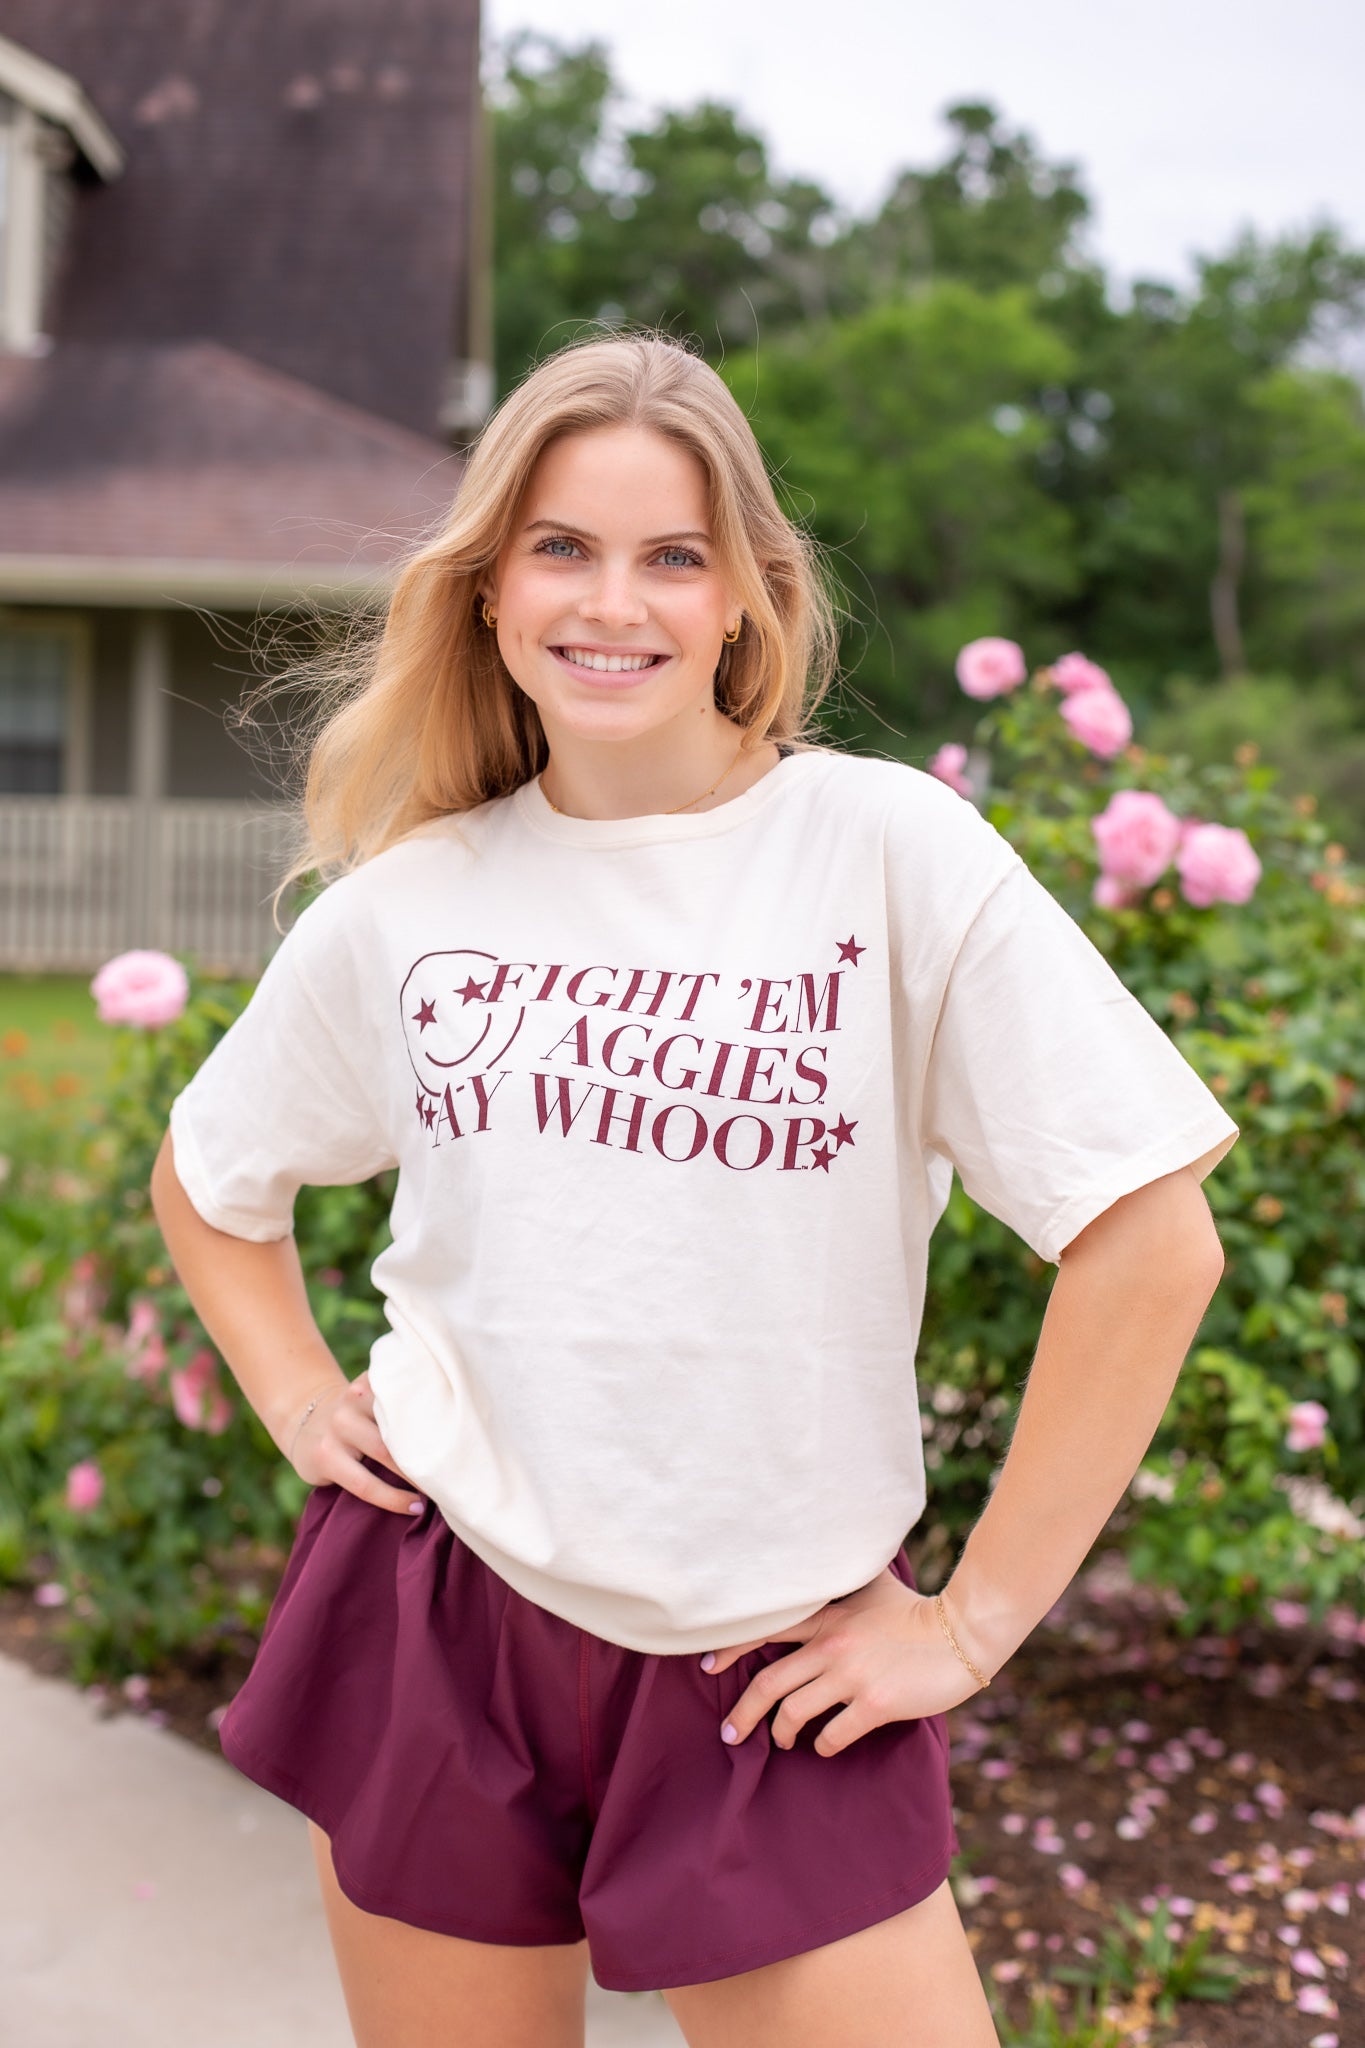 Fight 'Em Aggies Whoop T-Shirt